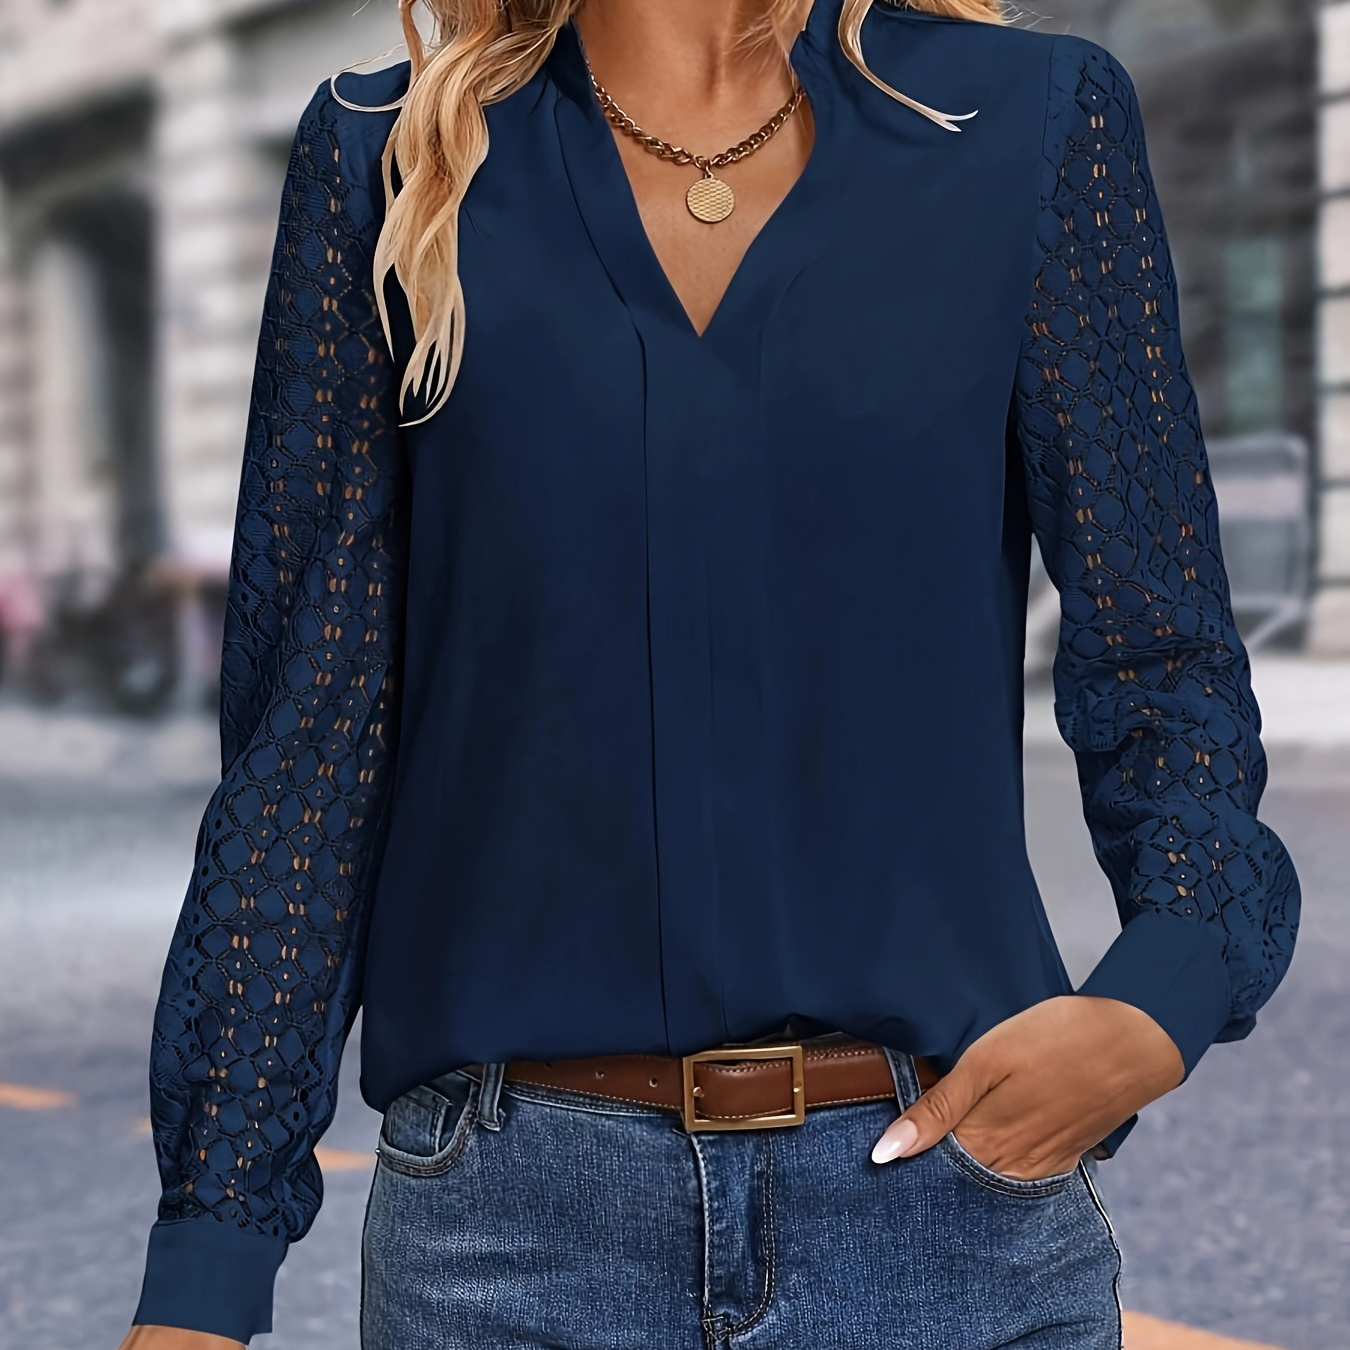 

Lace Splicing Notched Neck Blouse, Elegant Long Sleeve Blouse For Spring & Fall, Women's Clothing